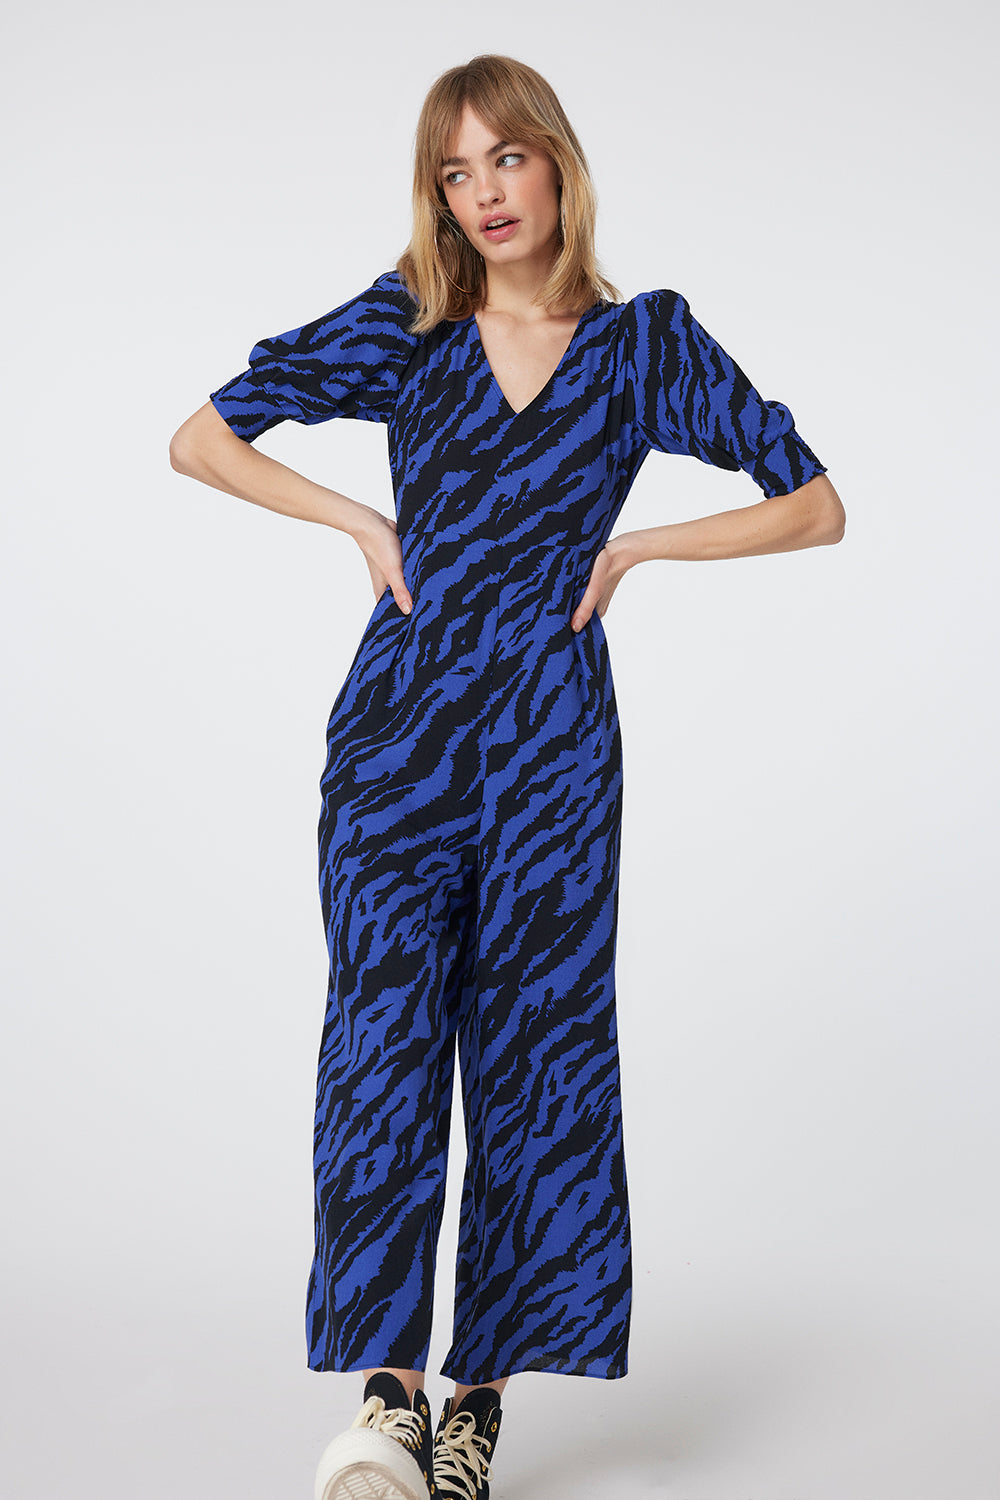 Electric Blue with Black Shadow Tiger V-Neck Jumpsuit